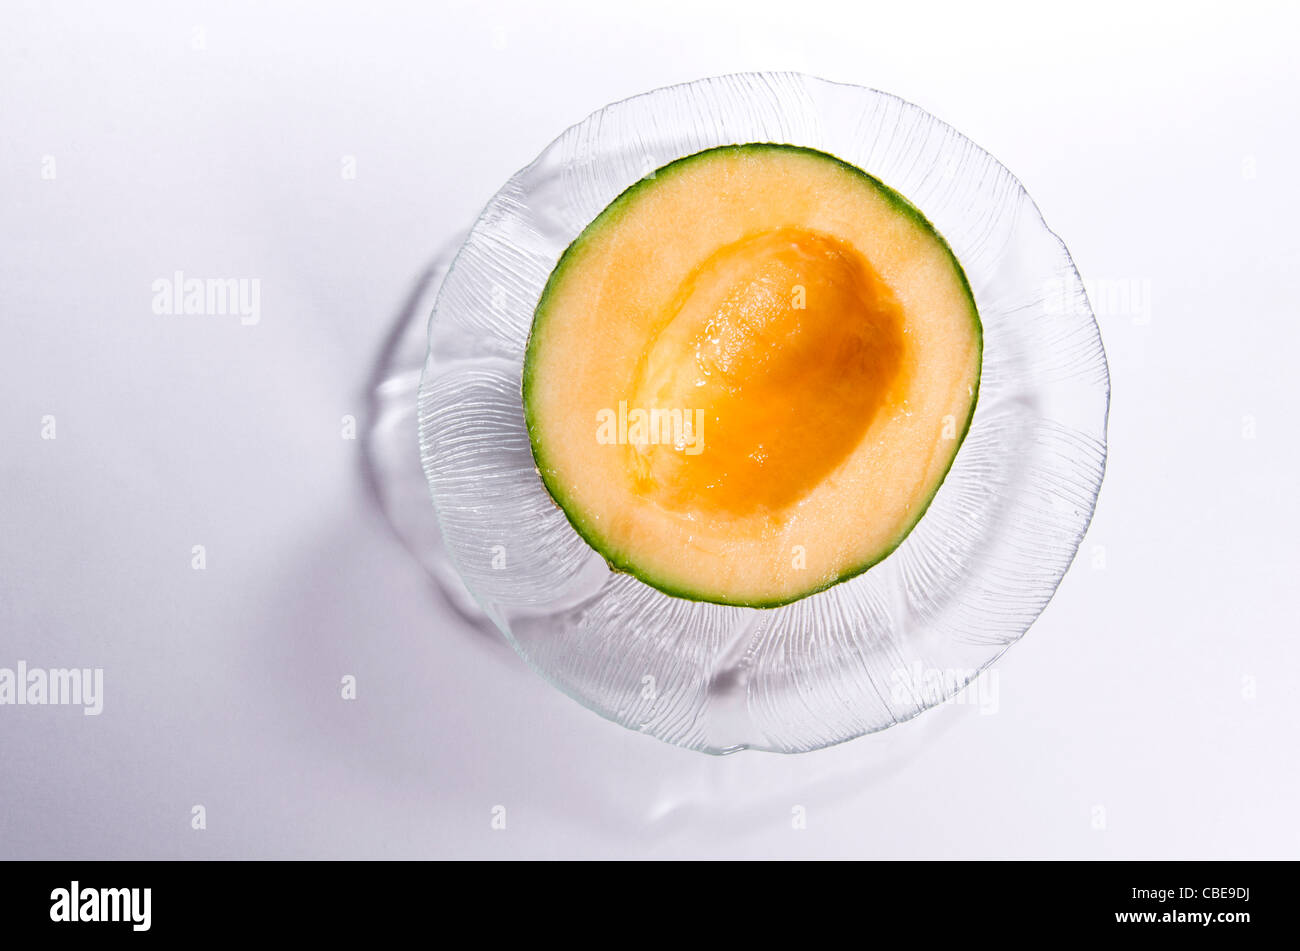 Half a cantaloupe, cut open, seeds scooped out, sitting on a glass plate. Stock Photo